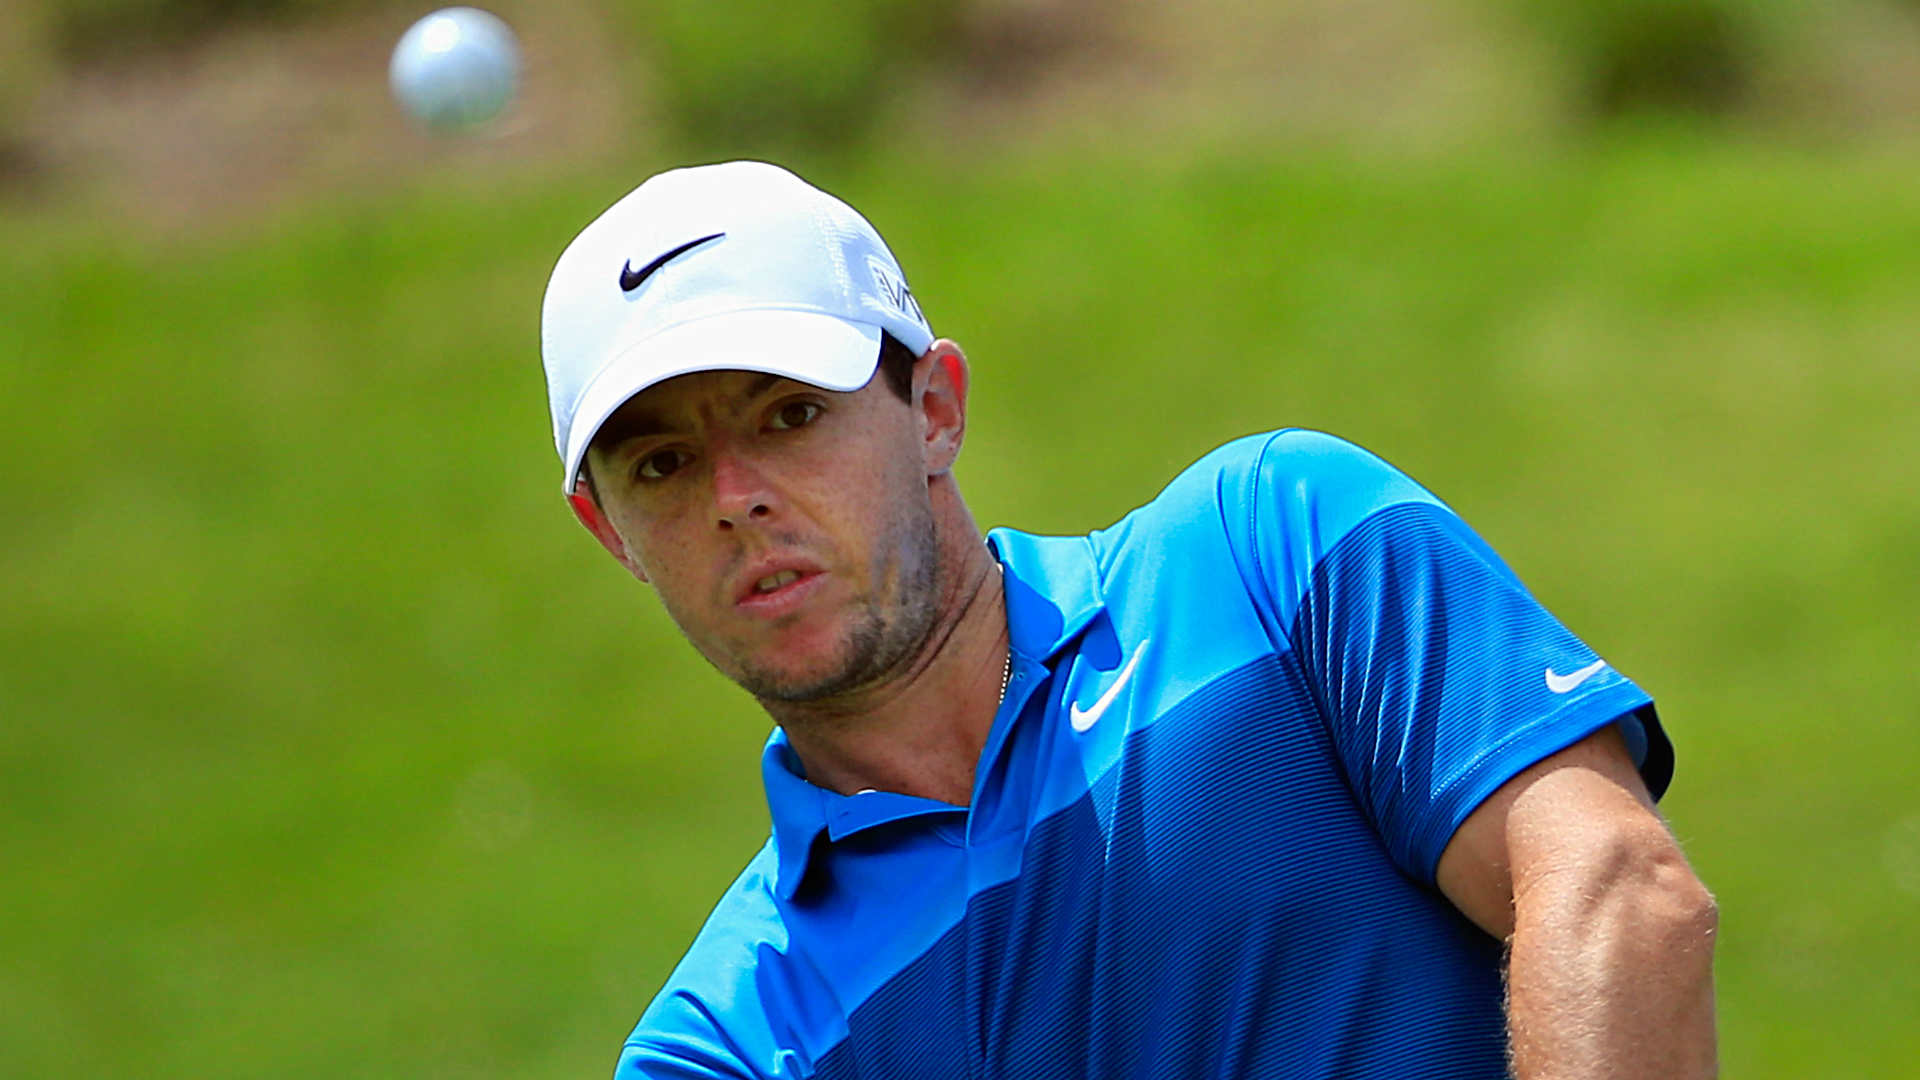 Rory Makes His Move To The Top At Canadian